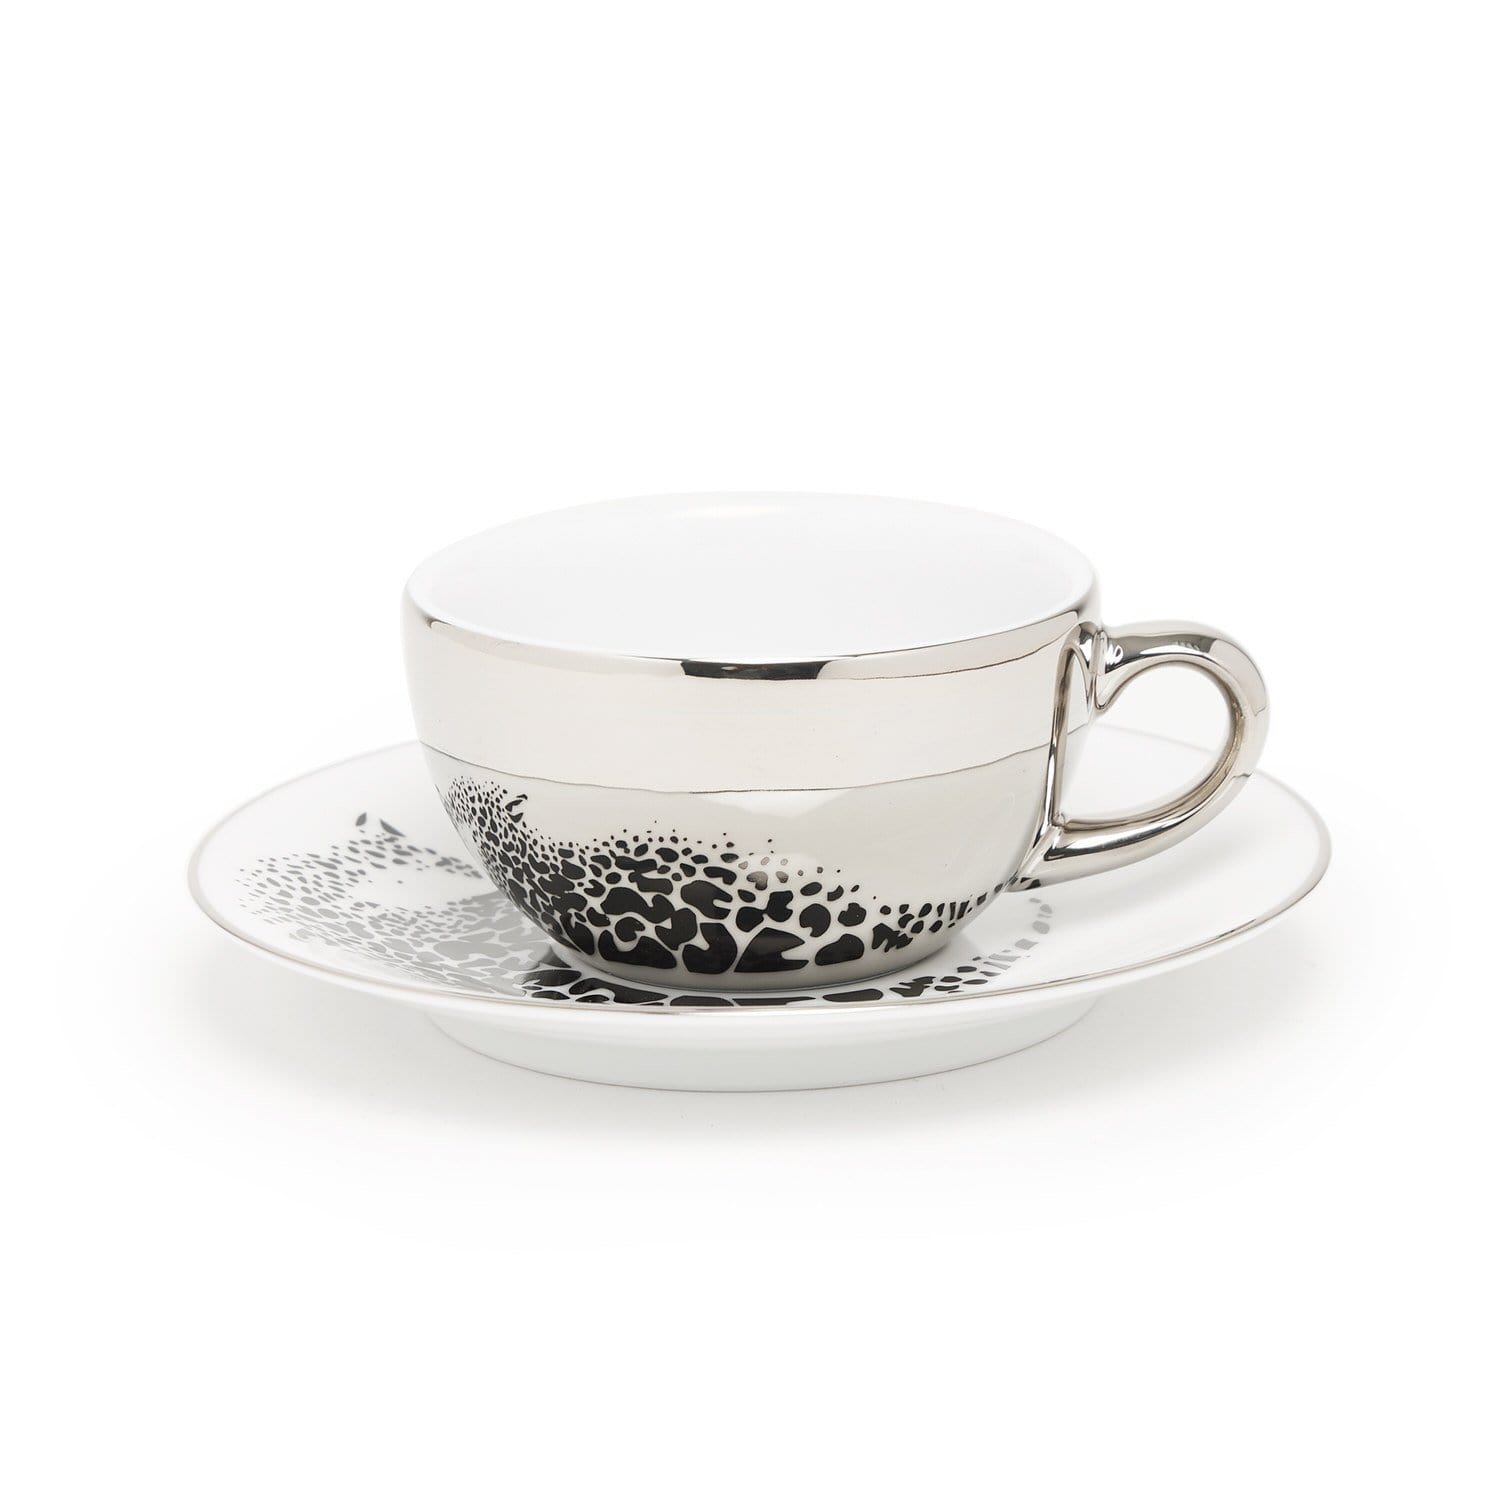 TIGER 6+6 COFFEE CUP & SAUCER IN GIFT BOX